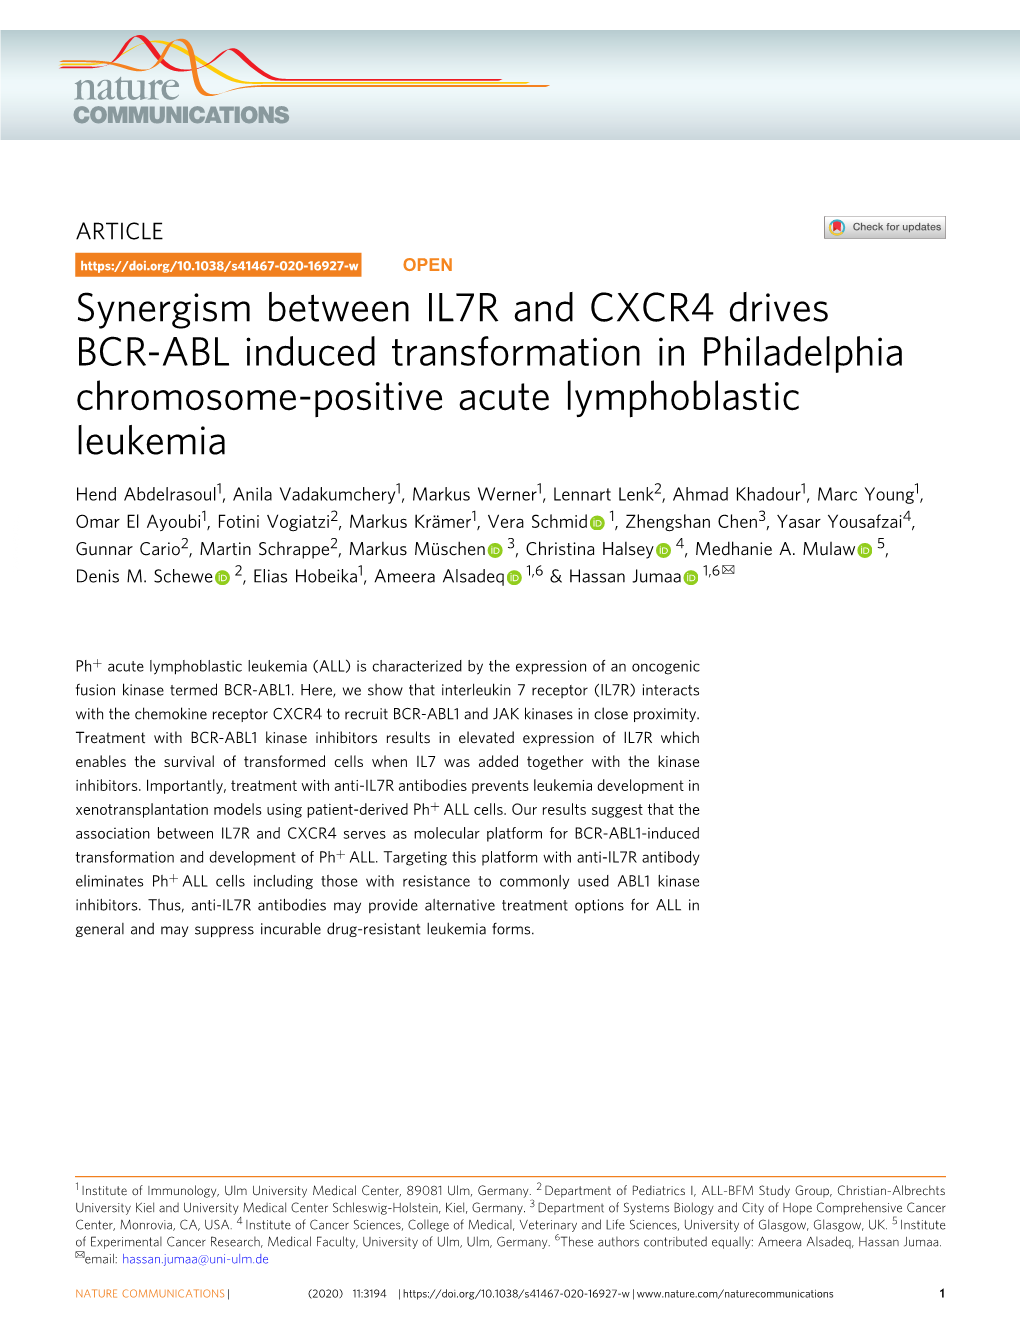 Synergism Between IL7R and CXCR4 Drives BCR-ABL Induced Transformation in Philadelphia Chromosome-Positive Acute Lymphoblastic Leukemia